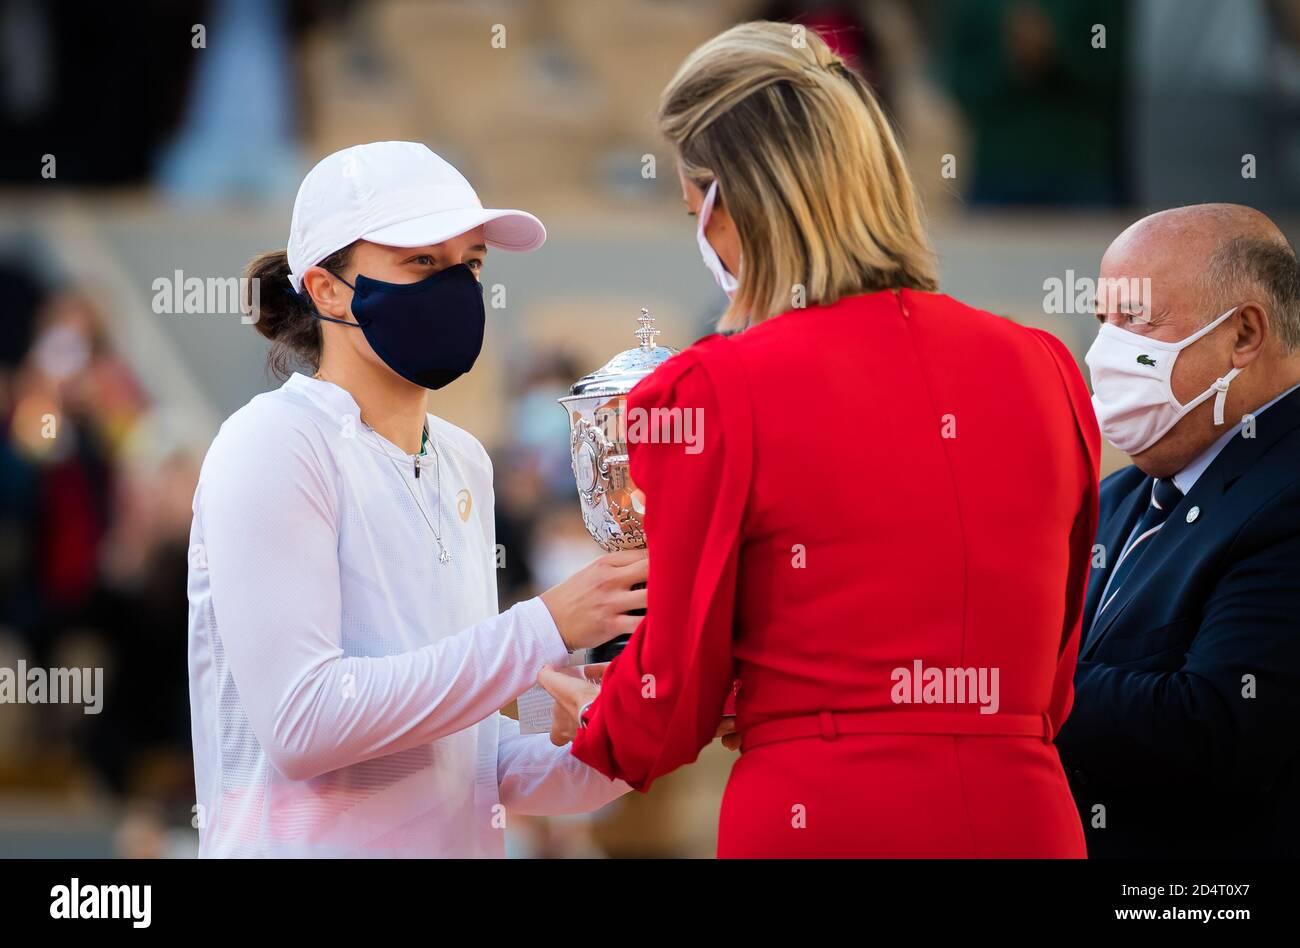 ga Swiatek of Poland with the champions trophy given by Mary Pierce after winning against Sofia Kenin of the United States the final of the Roland Ga Stock Photo